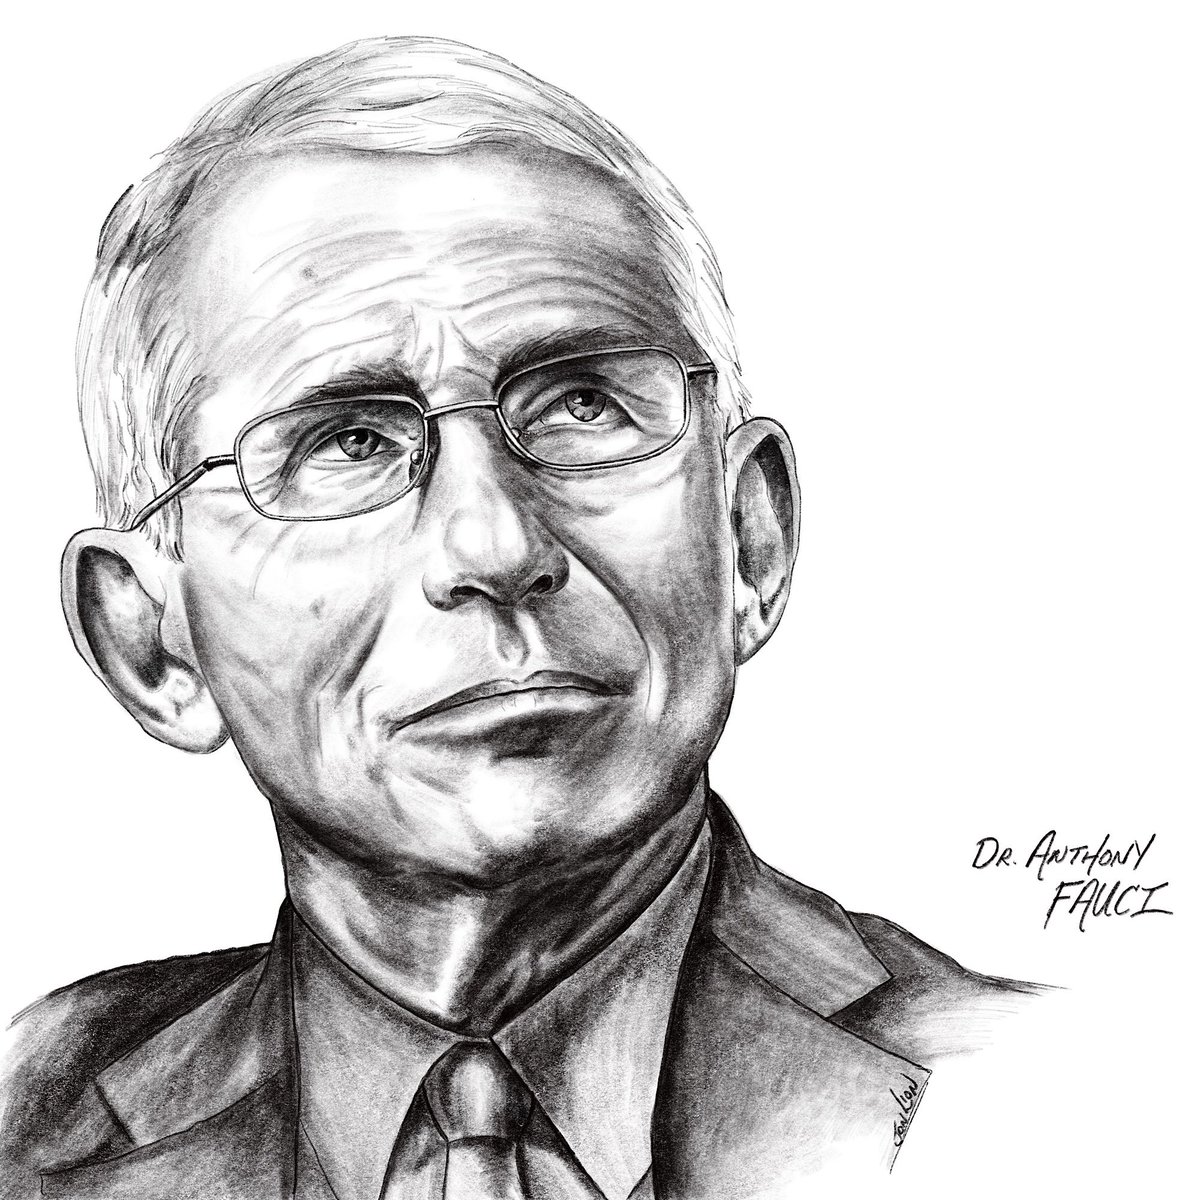 So, apparently @elonmusk thinks it’s ok to tweet out DANGEROUS crap about Dr Fauci I stand with Dr Fauci RETWEET my drawing if you agree